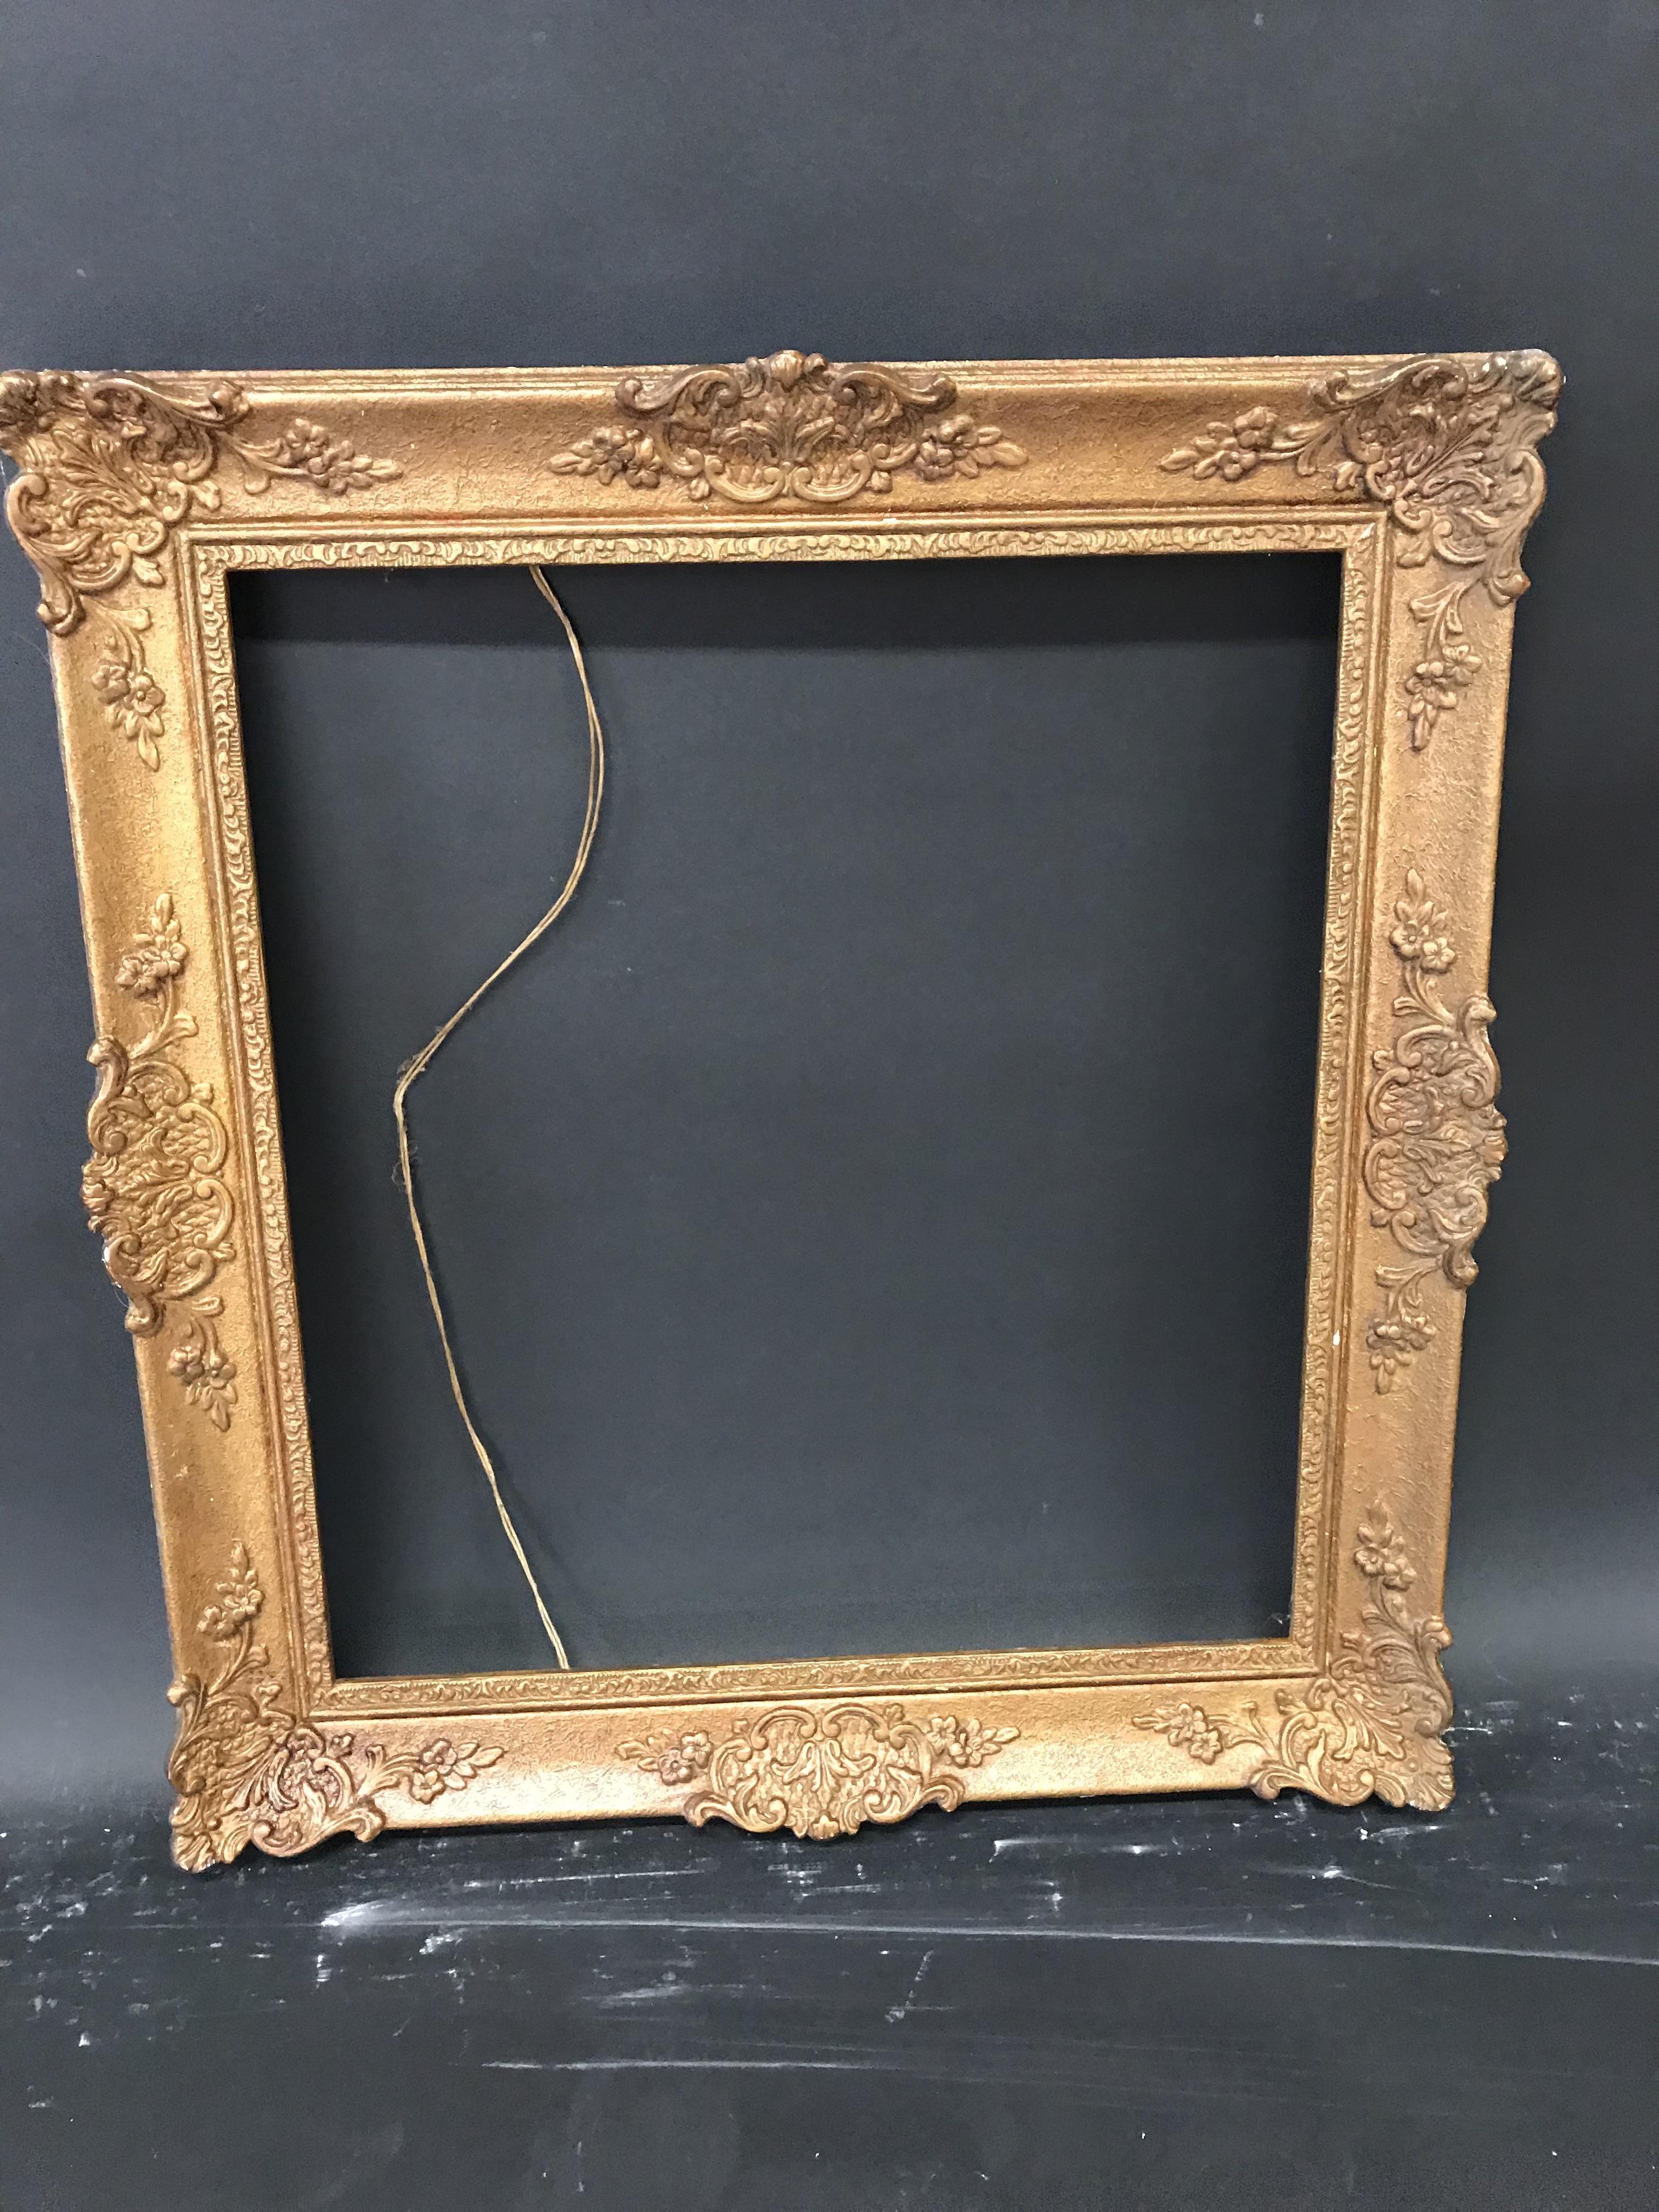 20th Century English School. A Gilt Composition Frame, with Swept Centres and Corners, 21.25" x 19. - Image 2 of 3